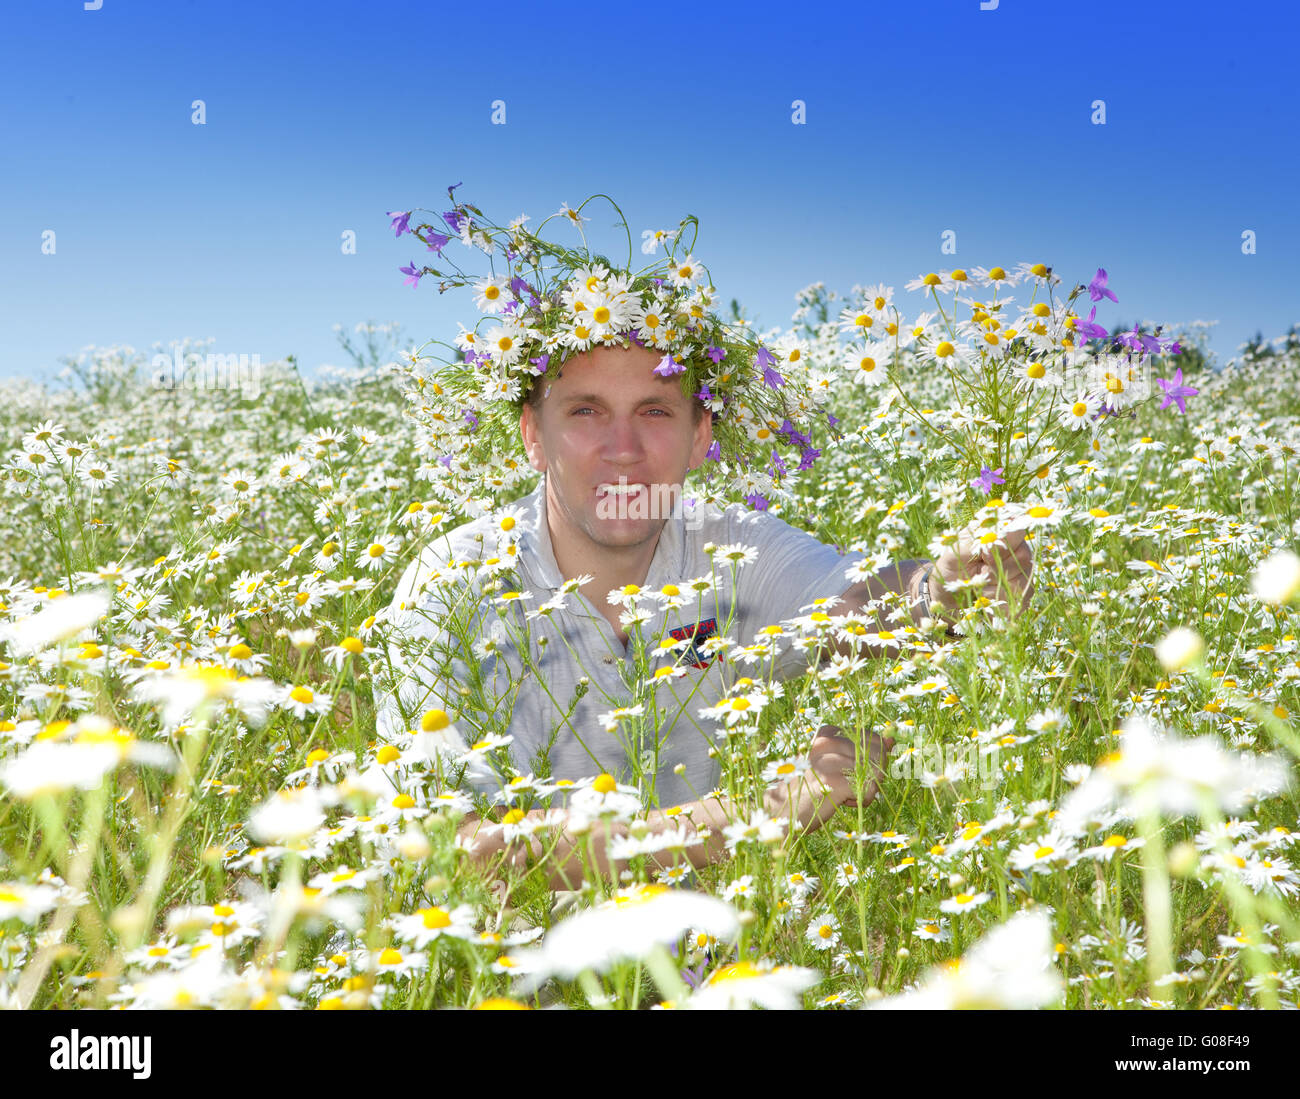 The smiling man in a wreath from wild flowers Stock Photo